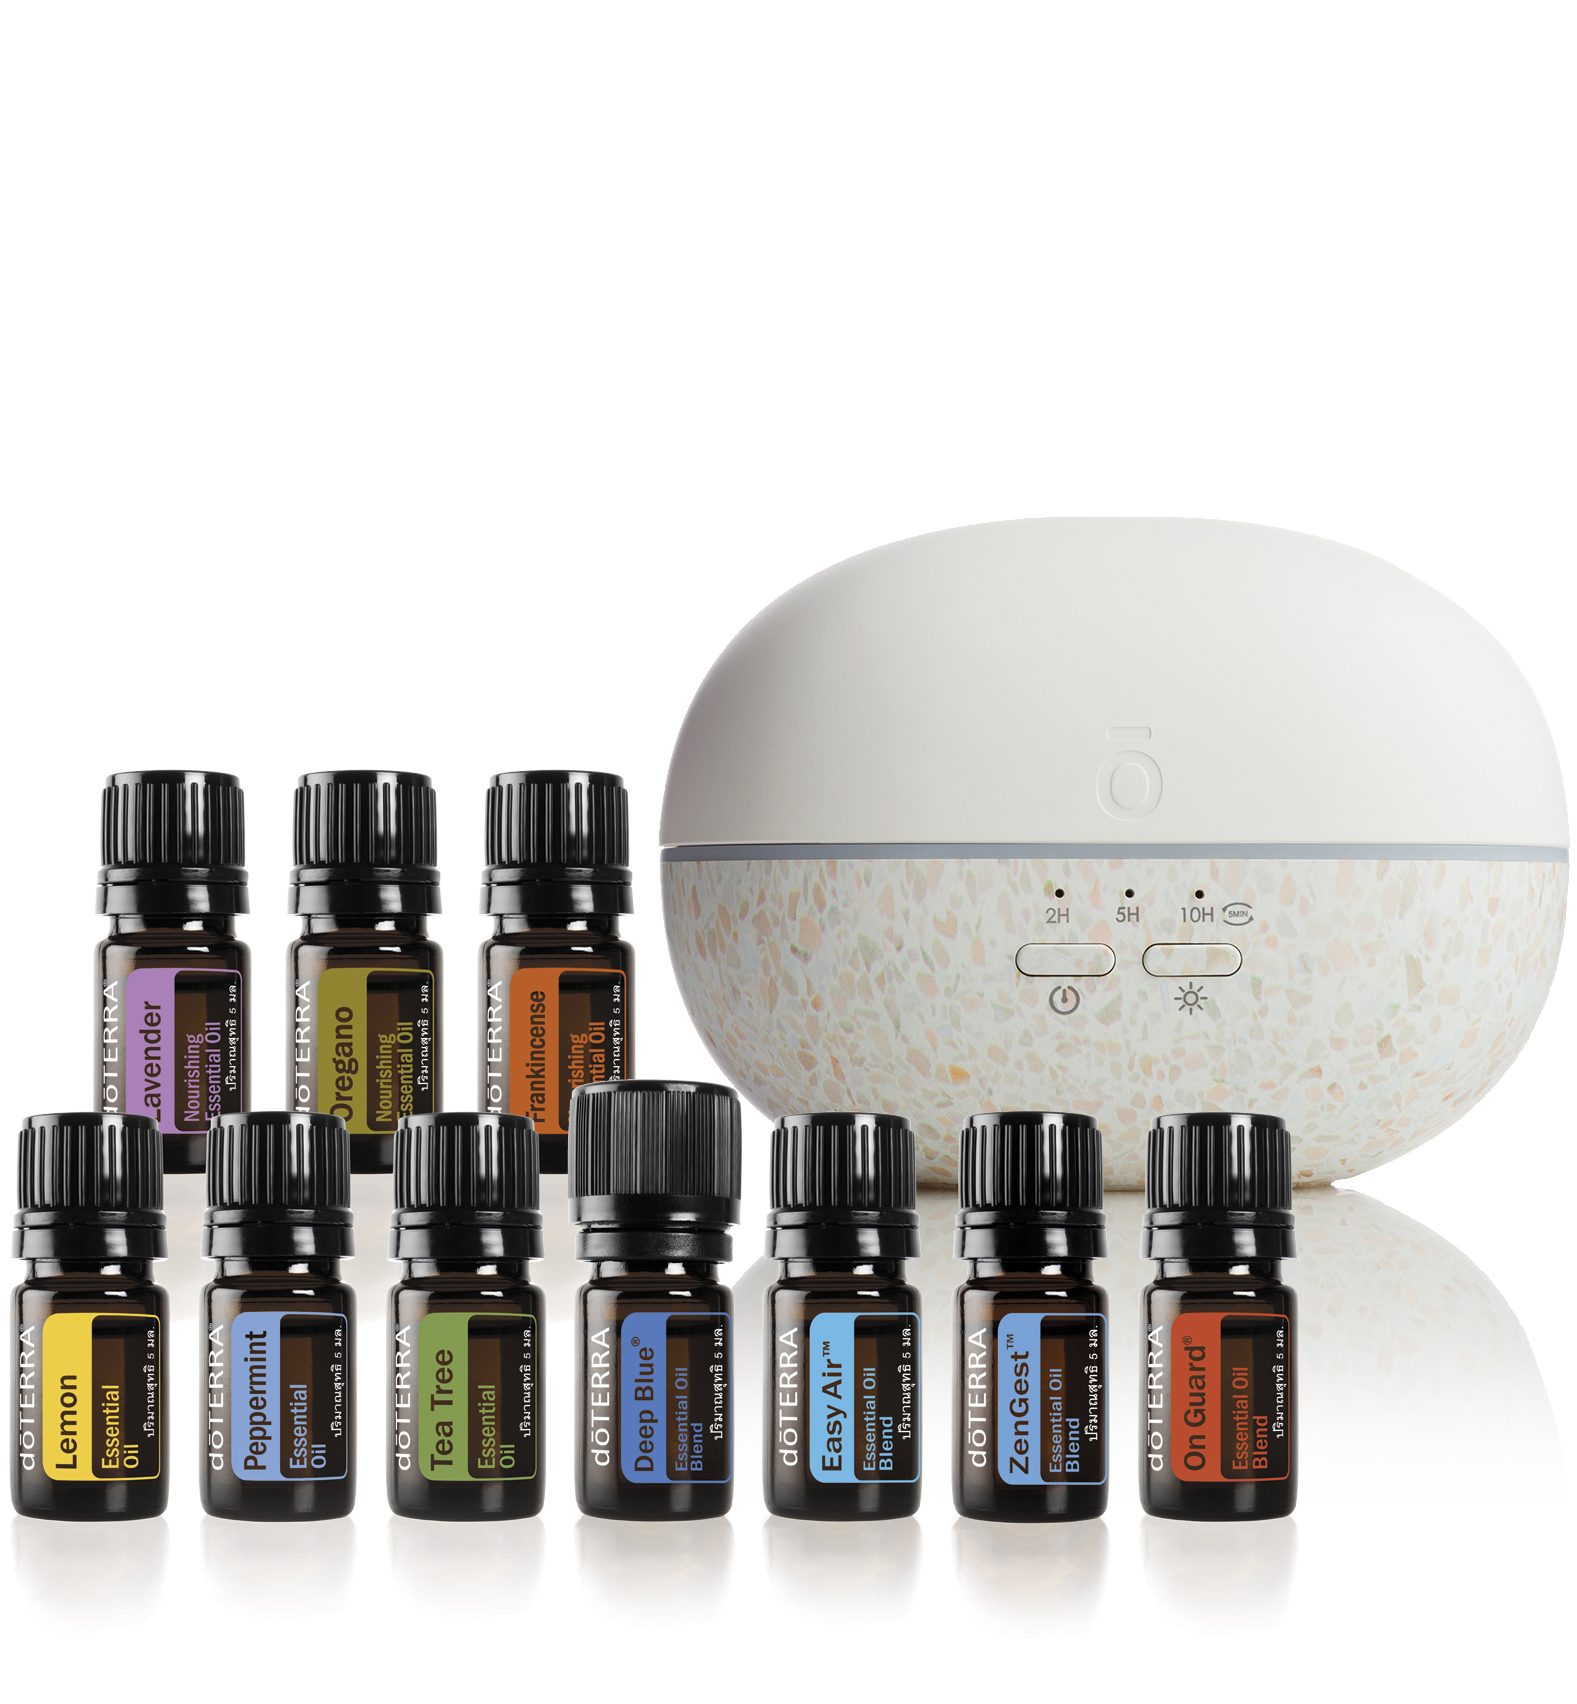 Family Essentials Kit with Pebble Diffuser | doTERRA Essential Oils